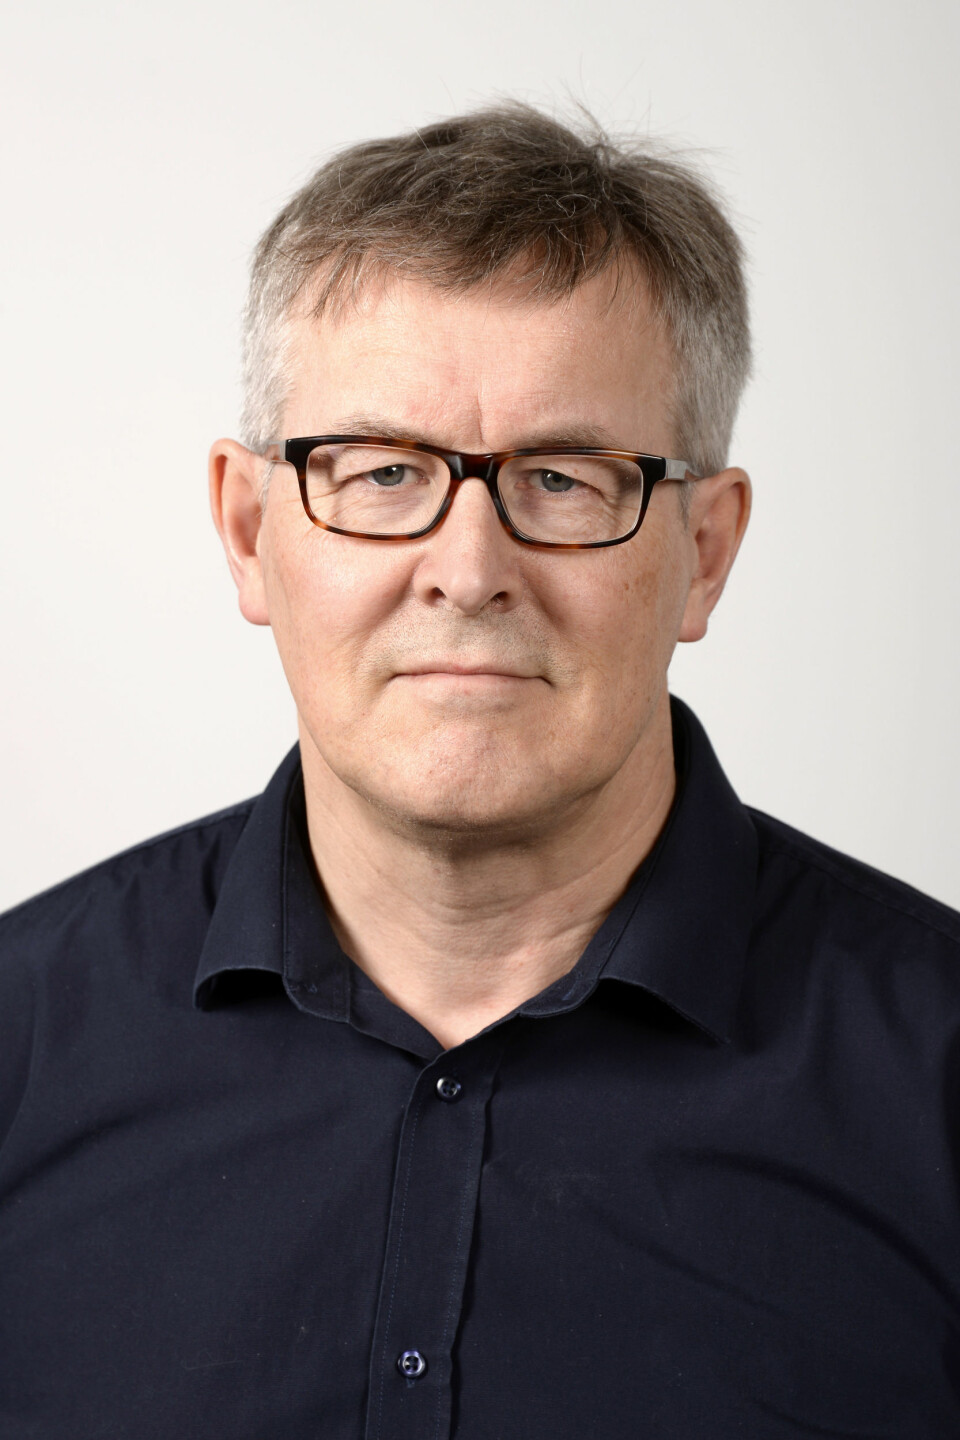 'We hope researchers, planners and decision-makers see the potential in this and adopt the method,' says professor Johan Gustav Bellika at the Norwegian Centre for E-health Research.